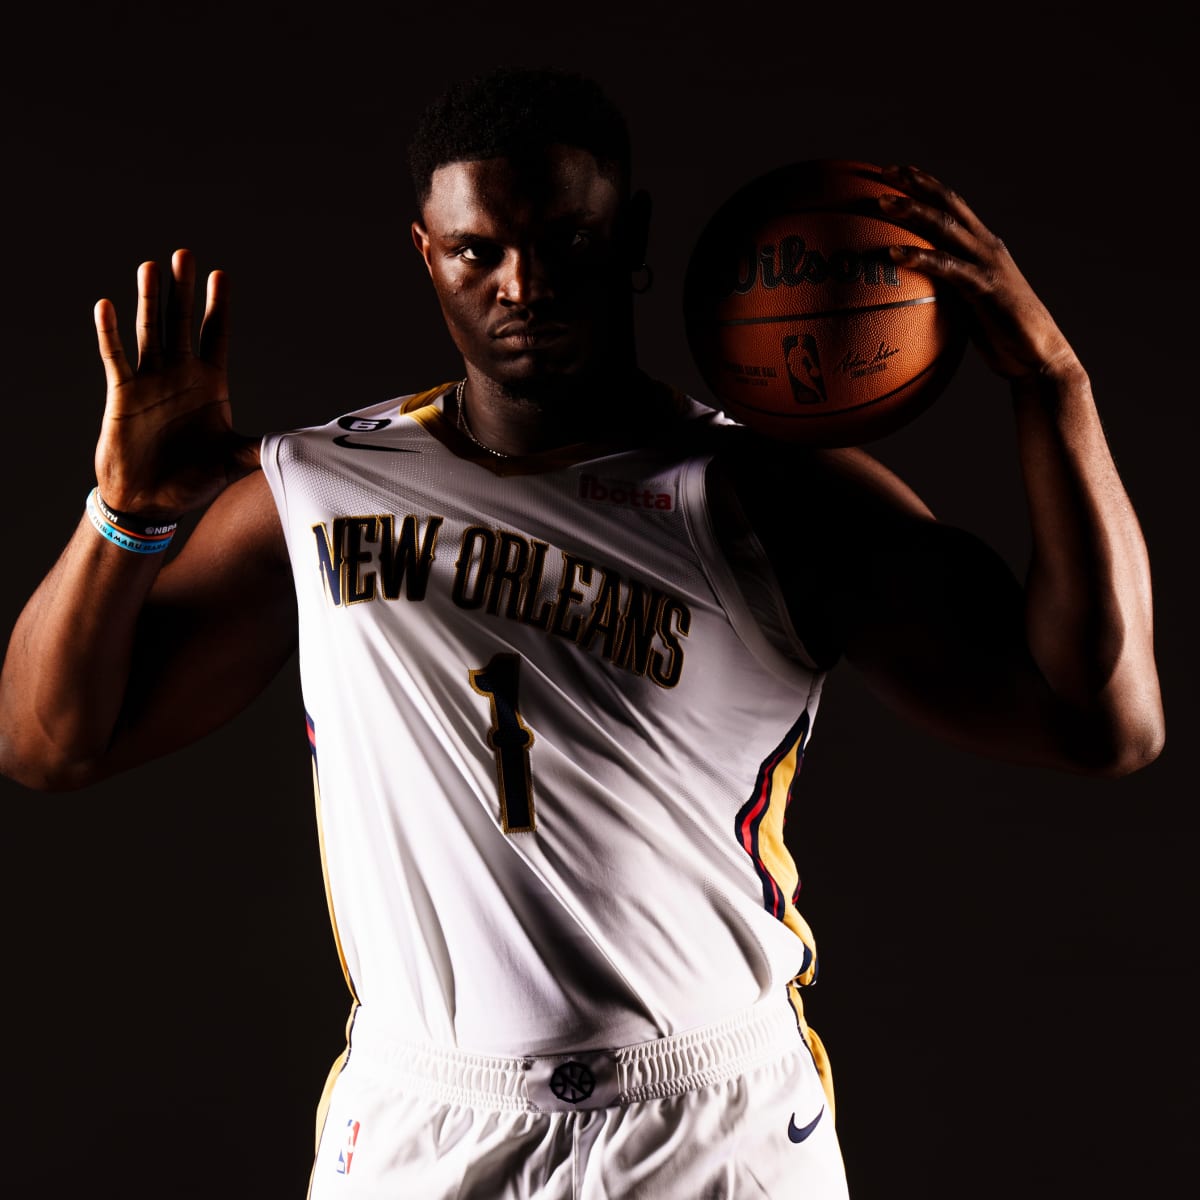 Zion Williamson before and after: Pelicans star has incredible